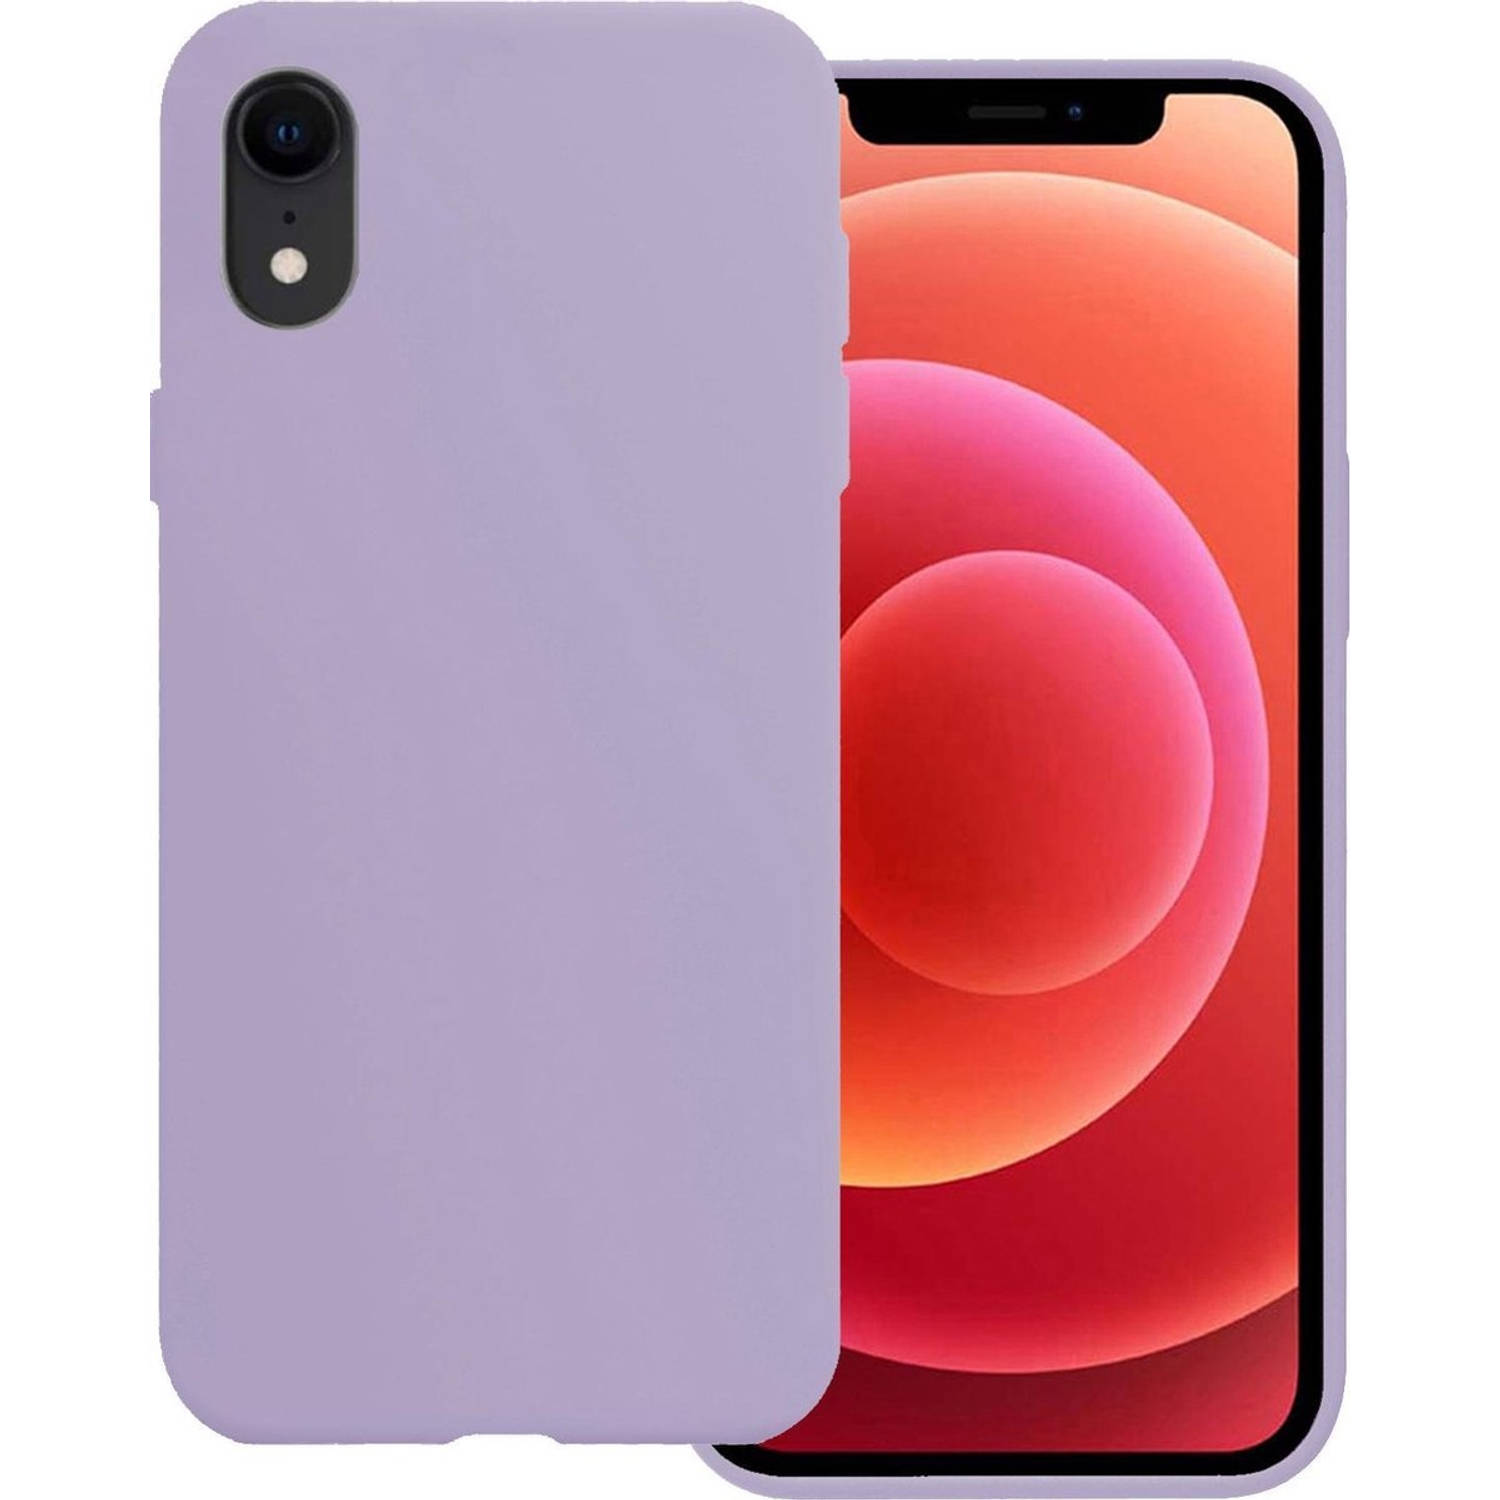 Basey Apple Iphone Xr Hoesje Siliconen Hoes Case Cover Apple Iphone Xr-lila